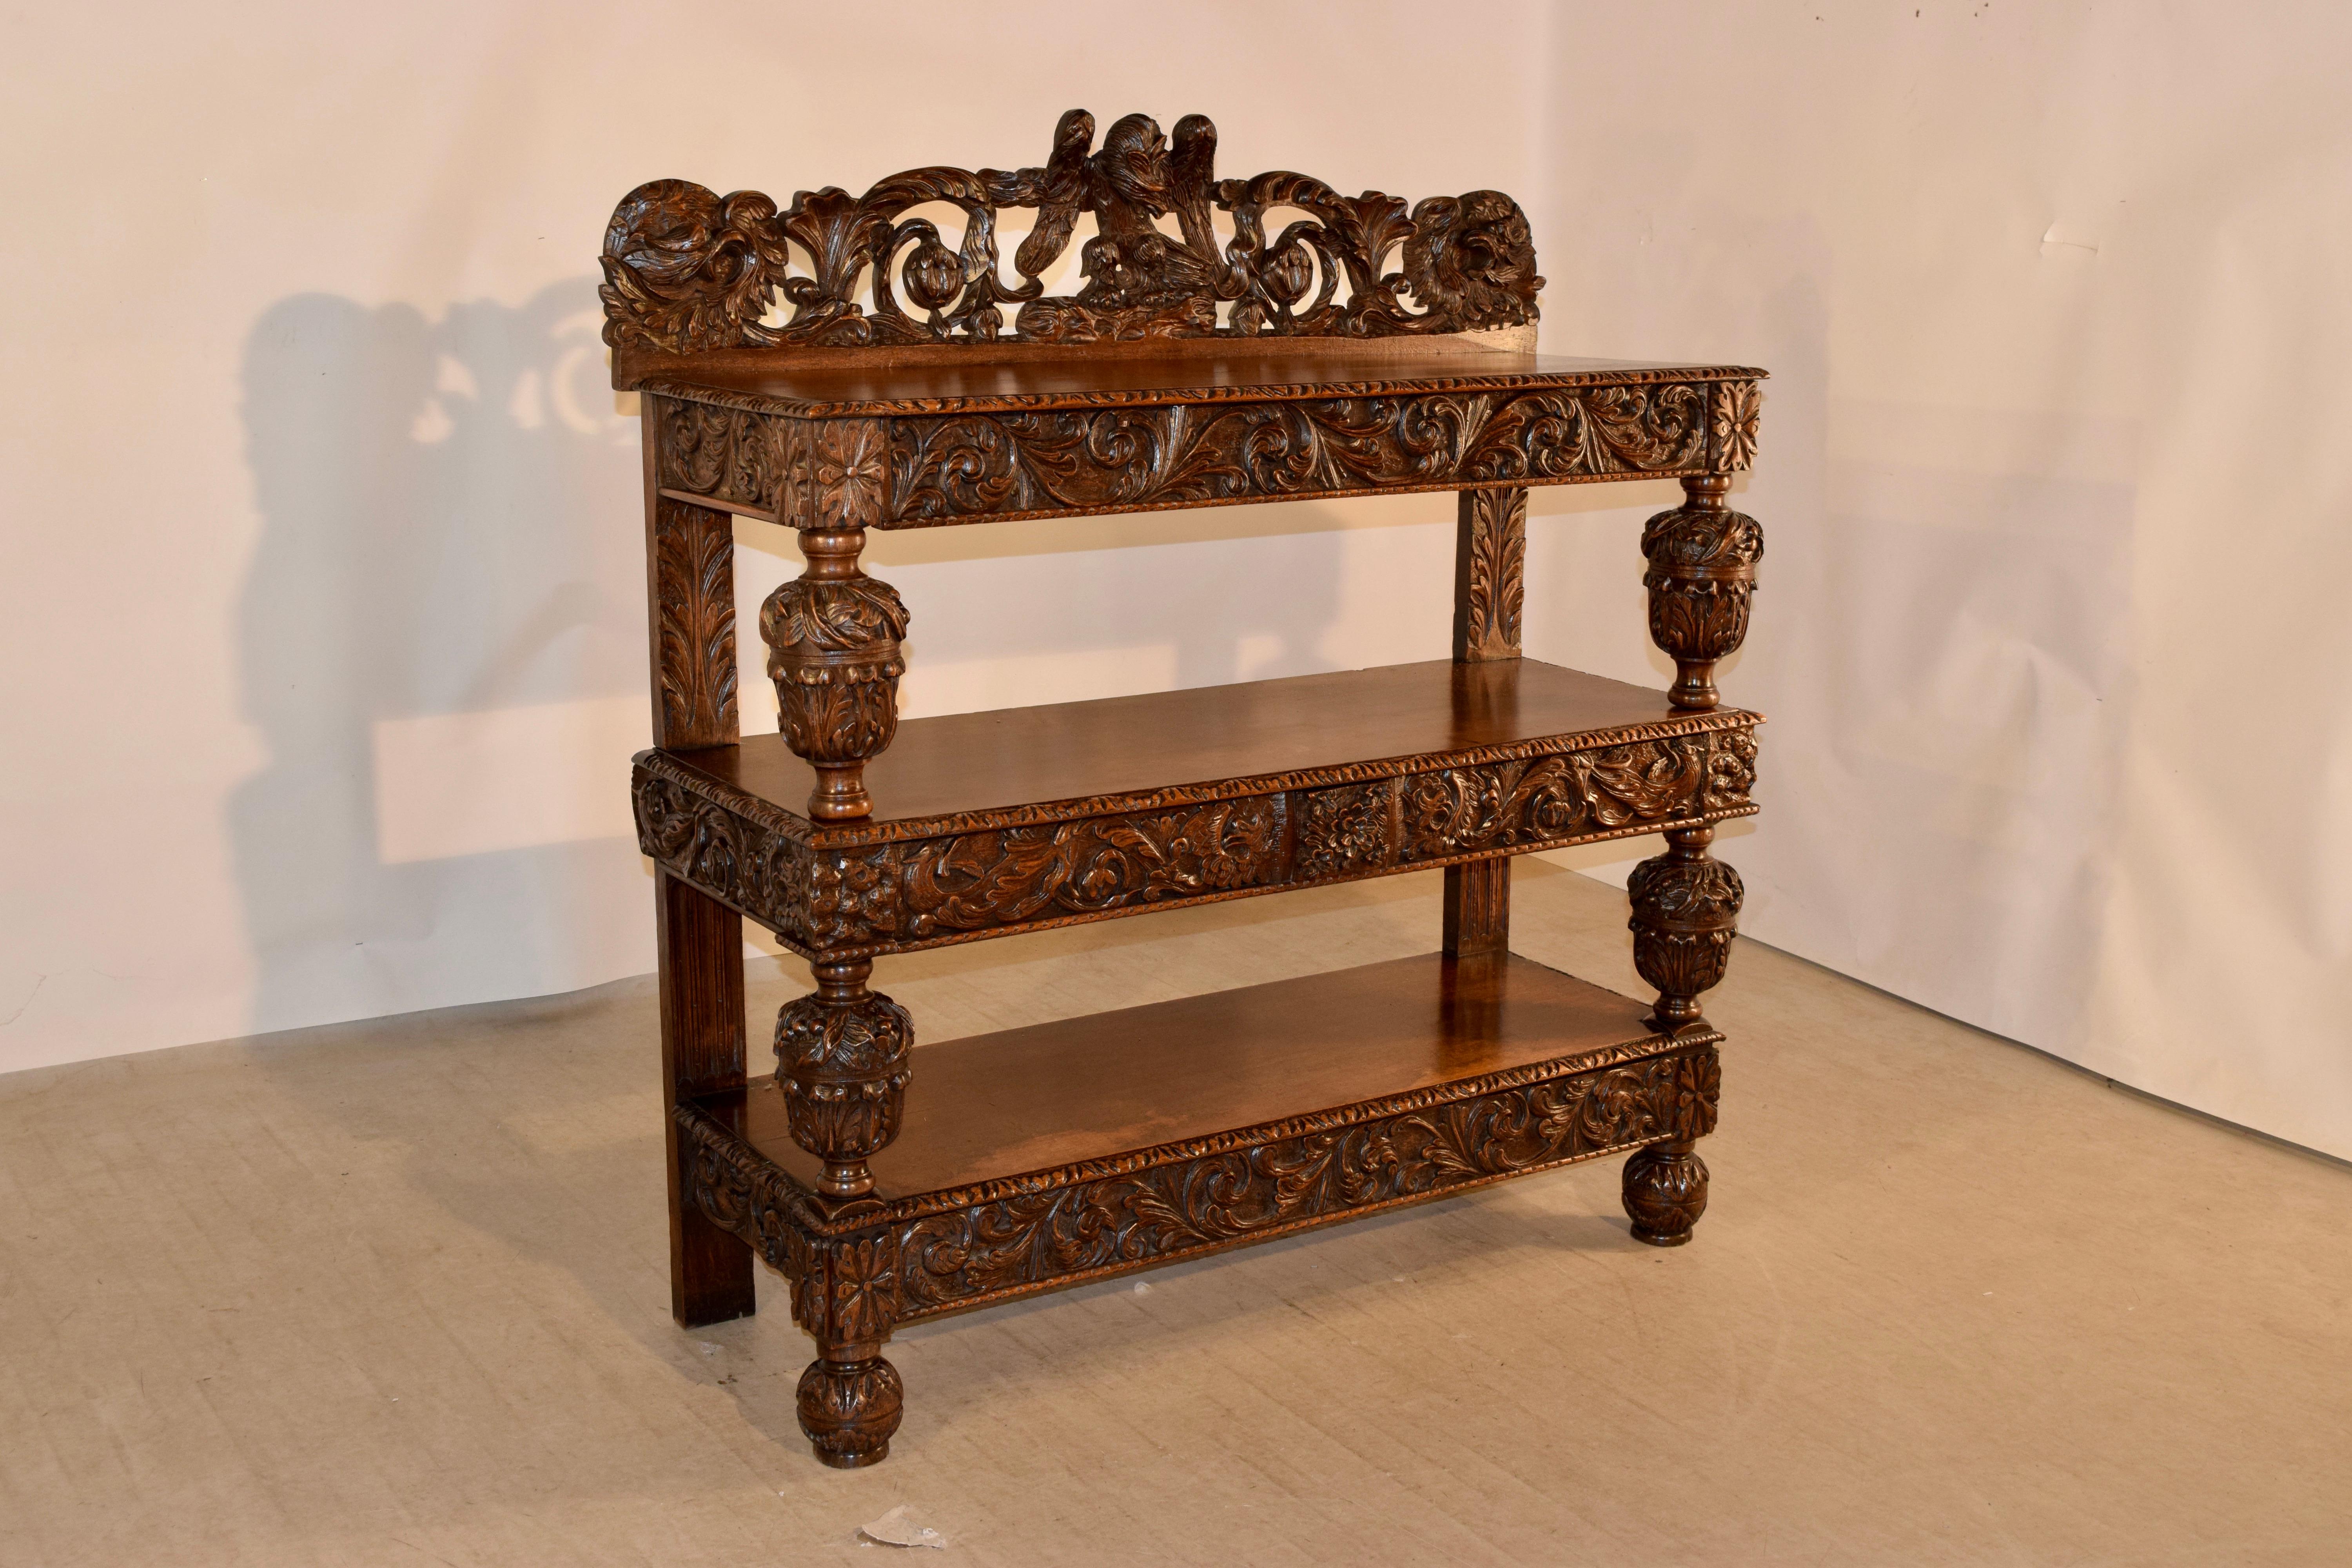 19th century oak dessert buffet from England with wonderfully hand carved decoration. The top has a hand carved and pierced backsplash with a central eagle flanked by florals and fruit, following down to three shelves, all with hand carved and